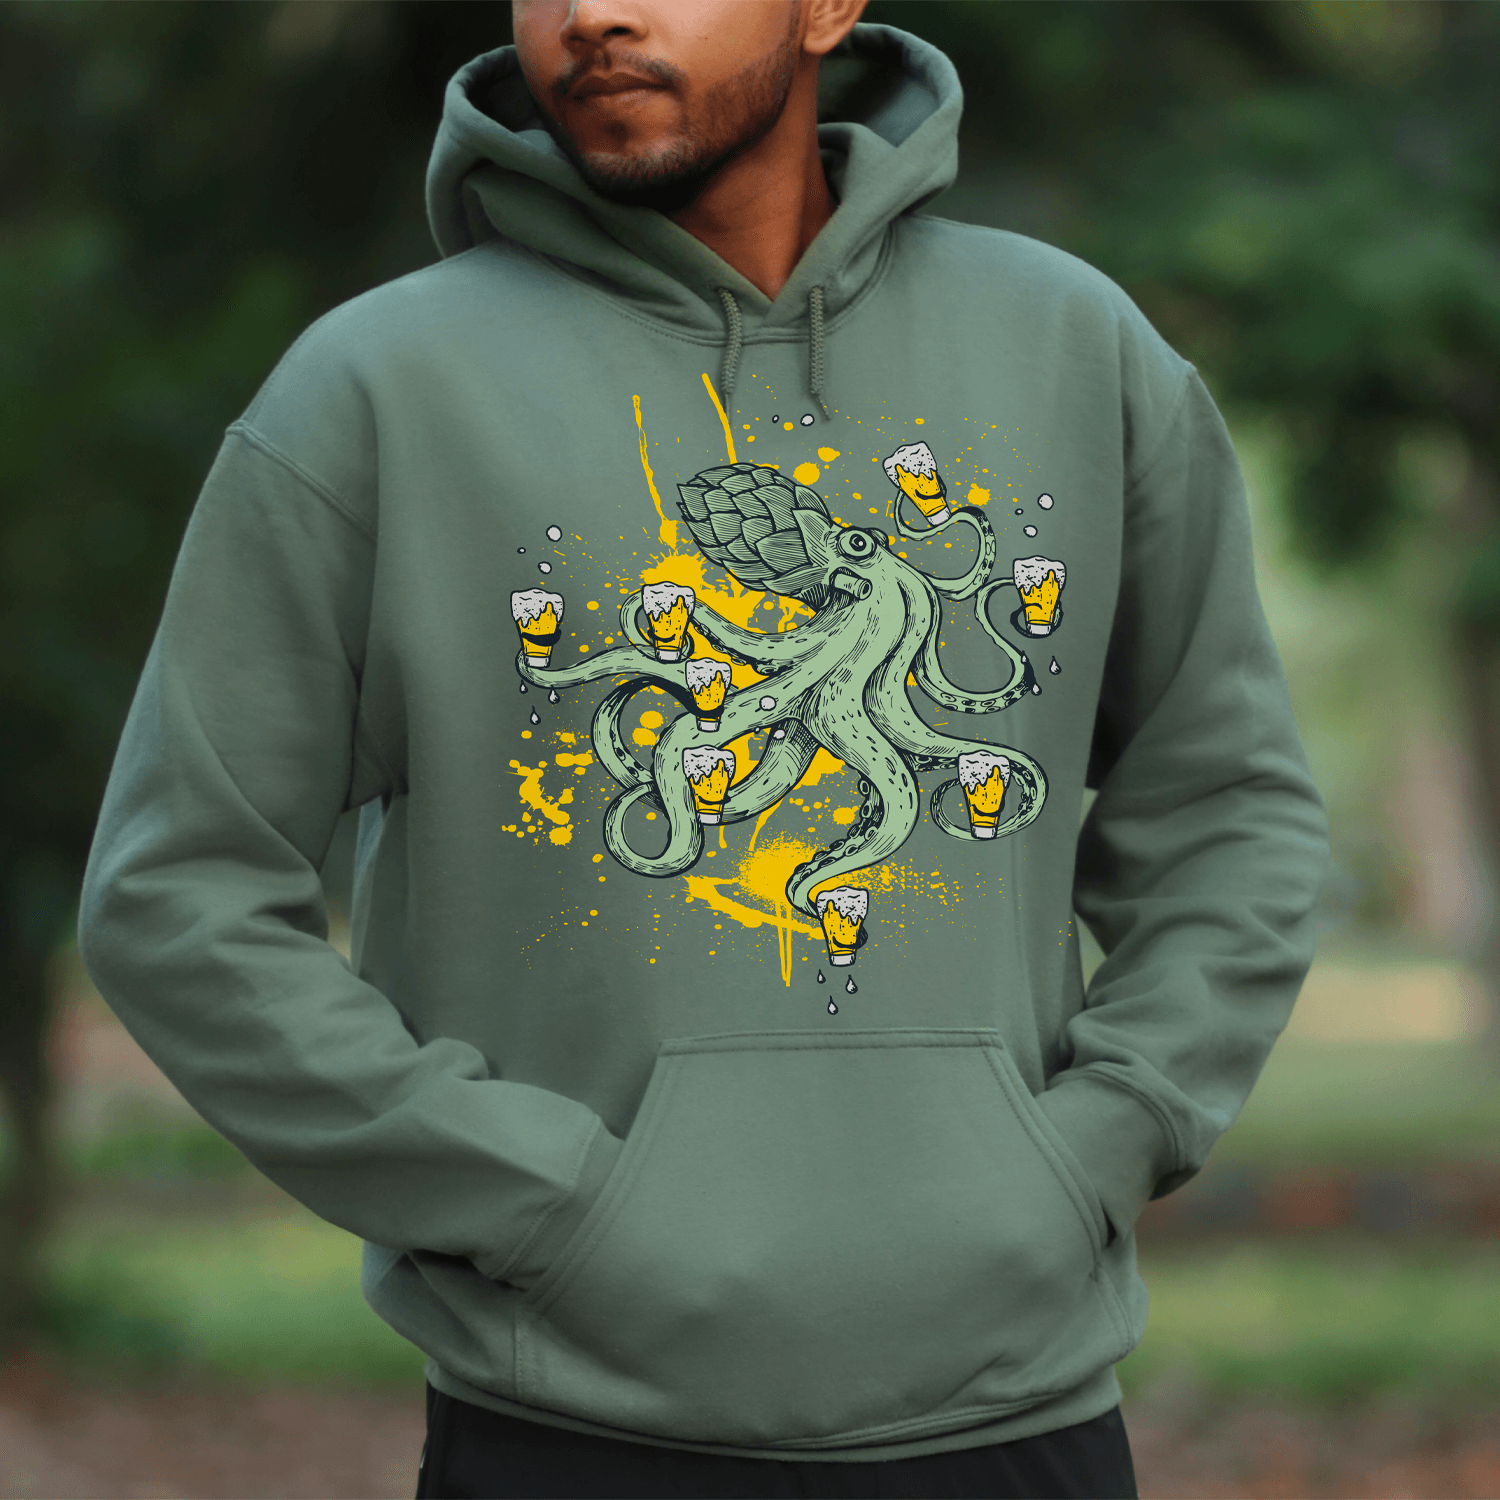 Mens Sweatshirts and Hoodies - Ales to Trails